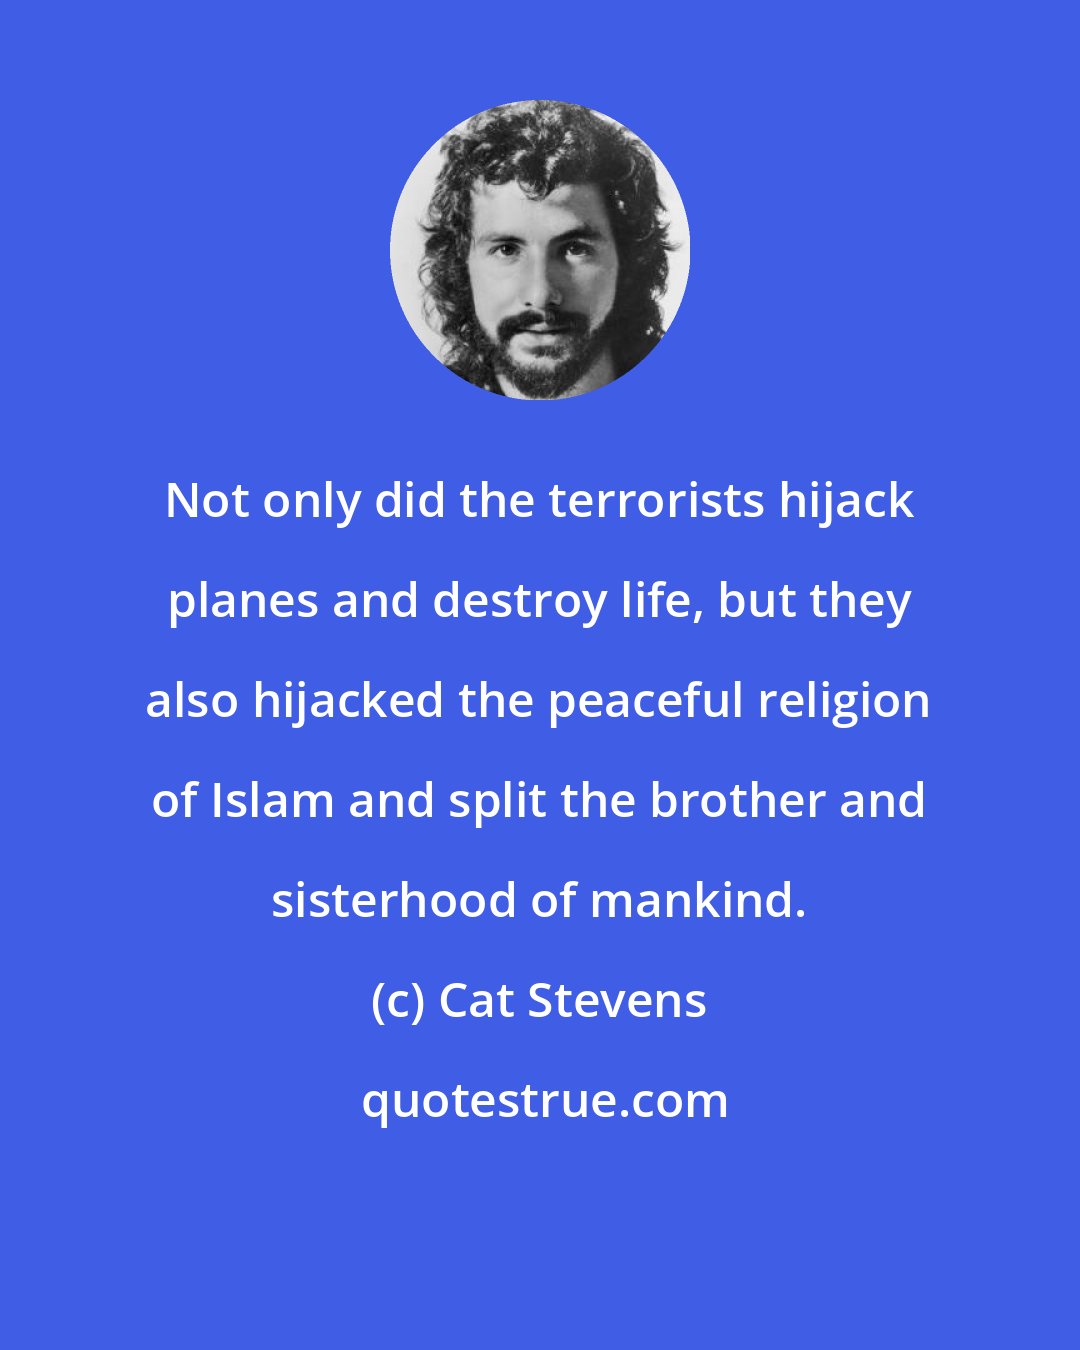 Cat Stevens: Not only did the terrorists hijack planes and destroy life, but they also hijacked the peaceful religion of Islam and split the brother and sisterhood of mankind.